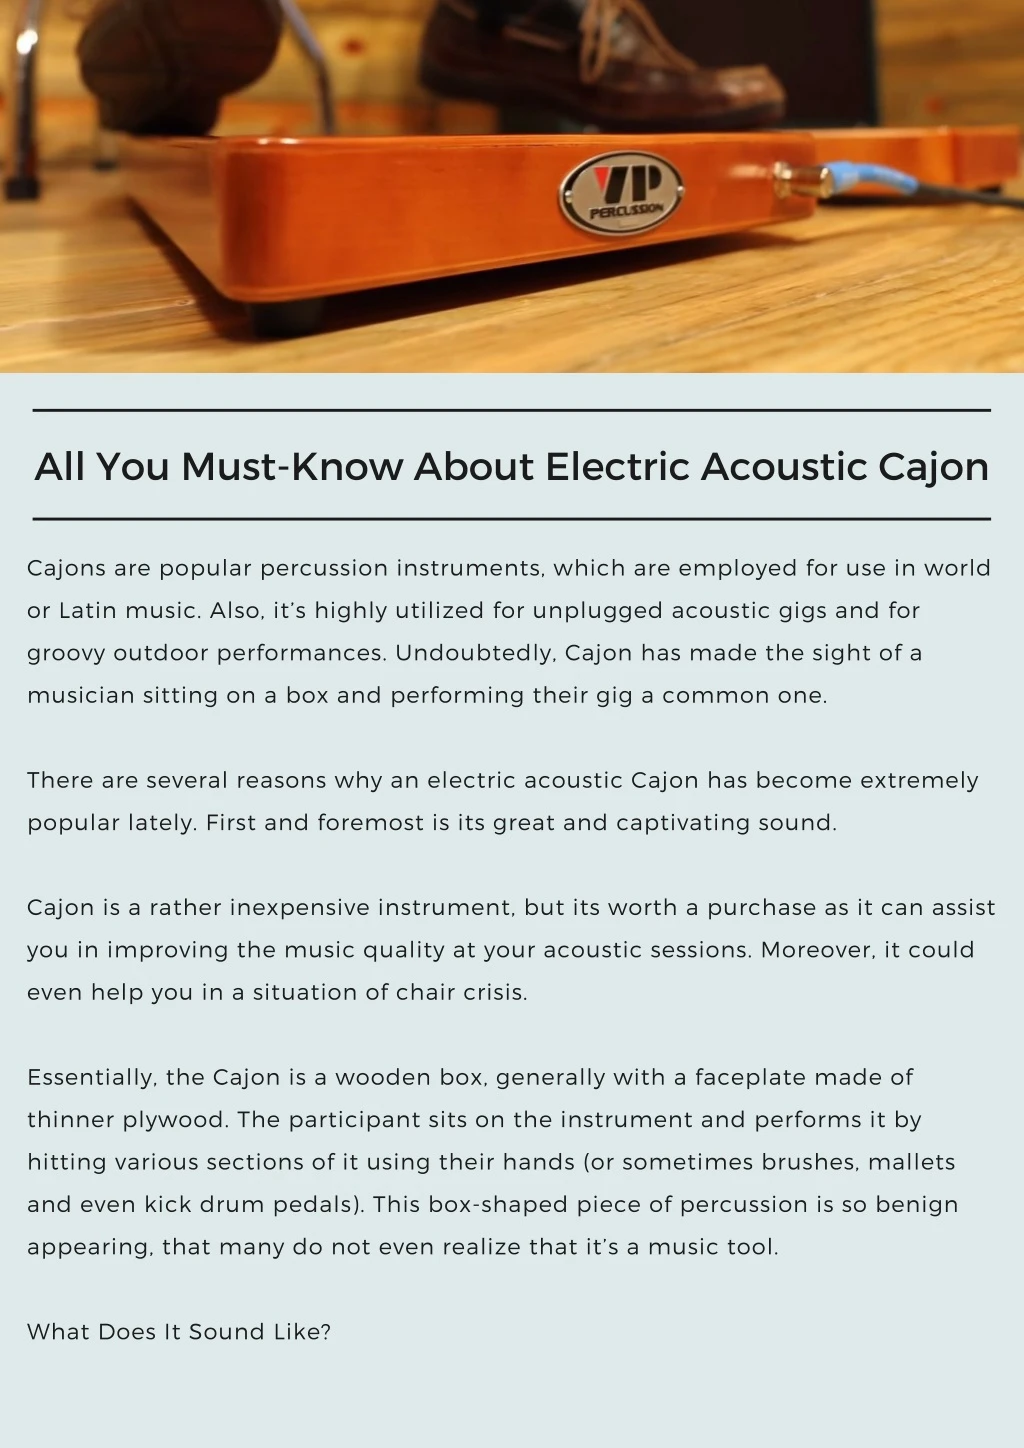 all you must know about electric acoustic cajon